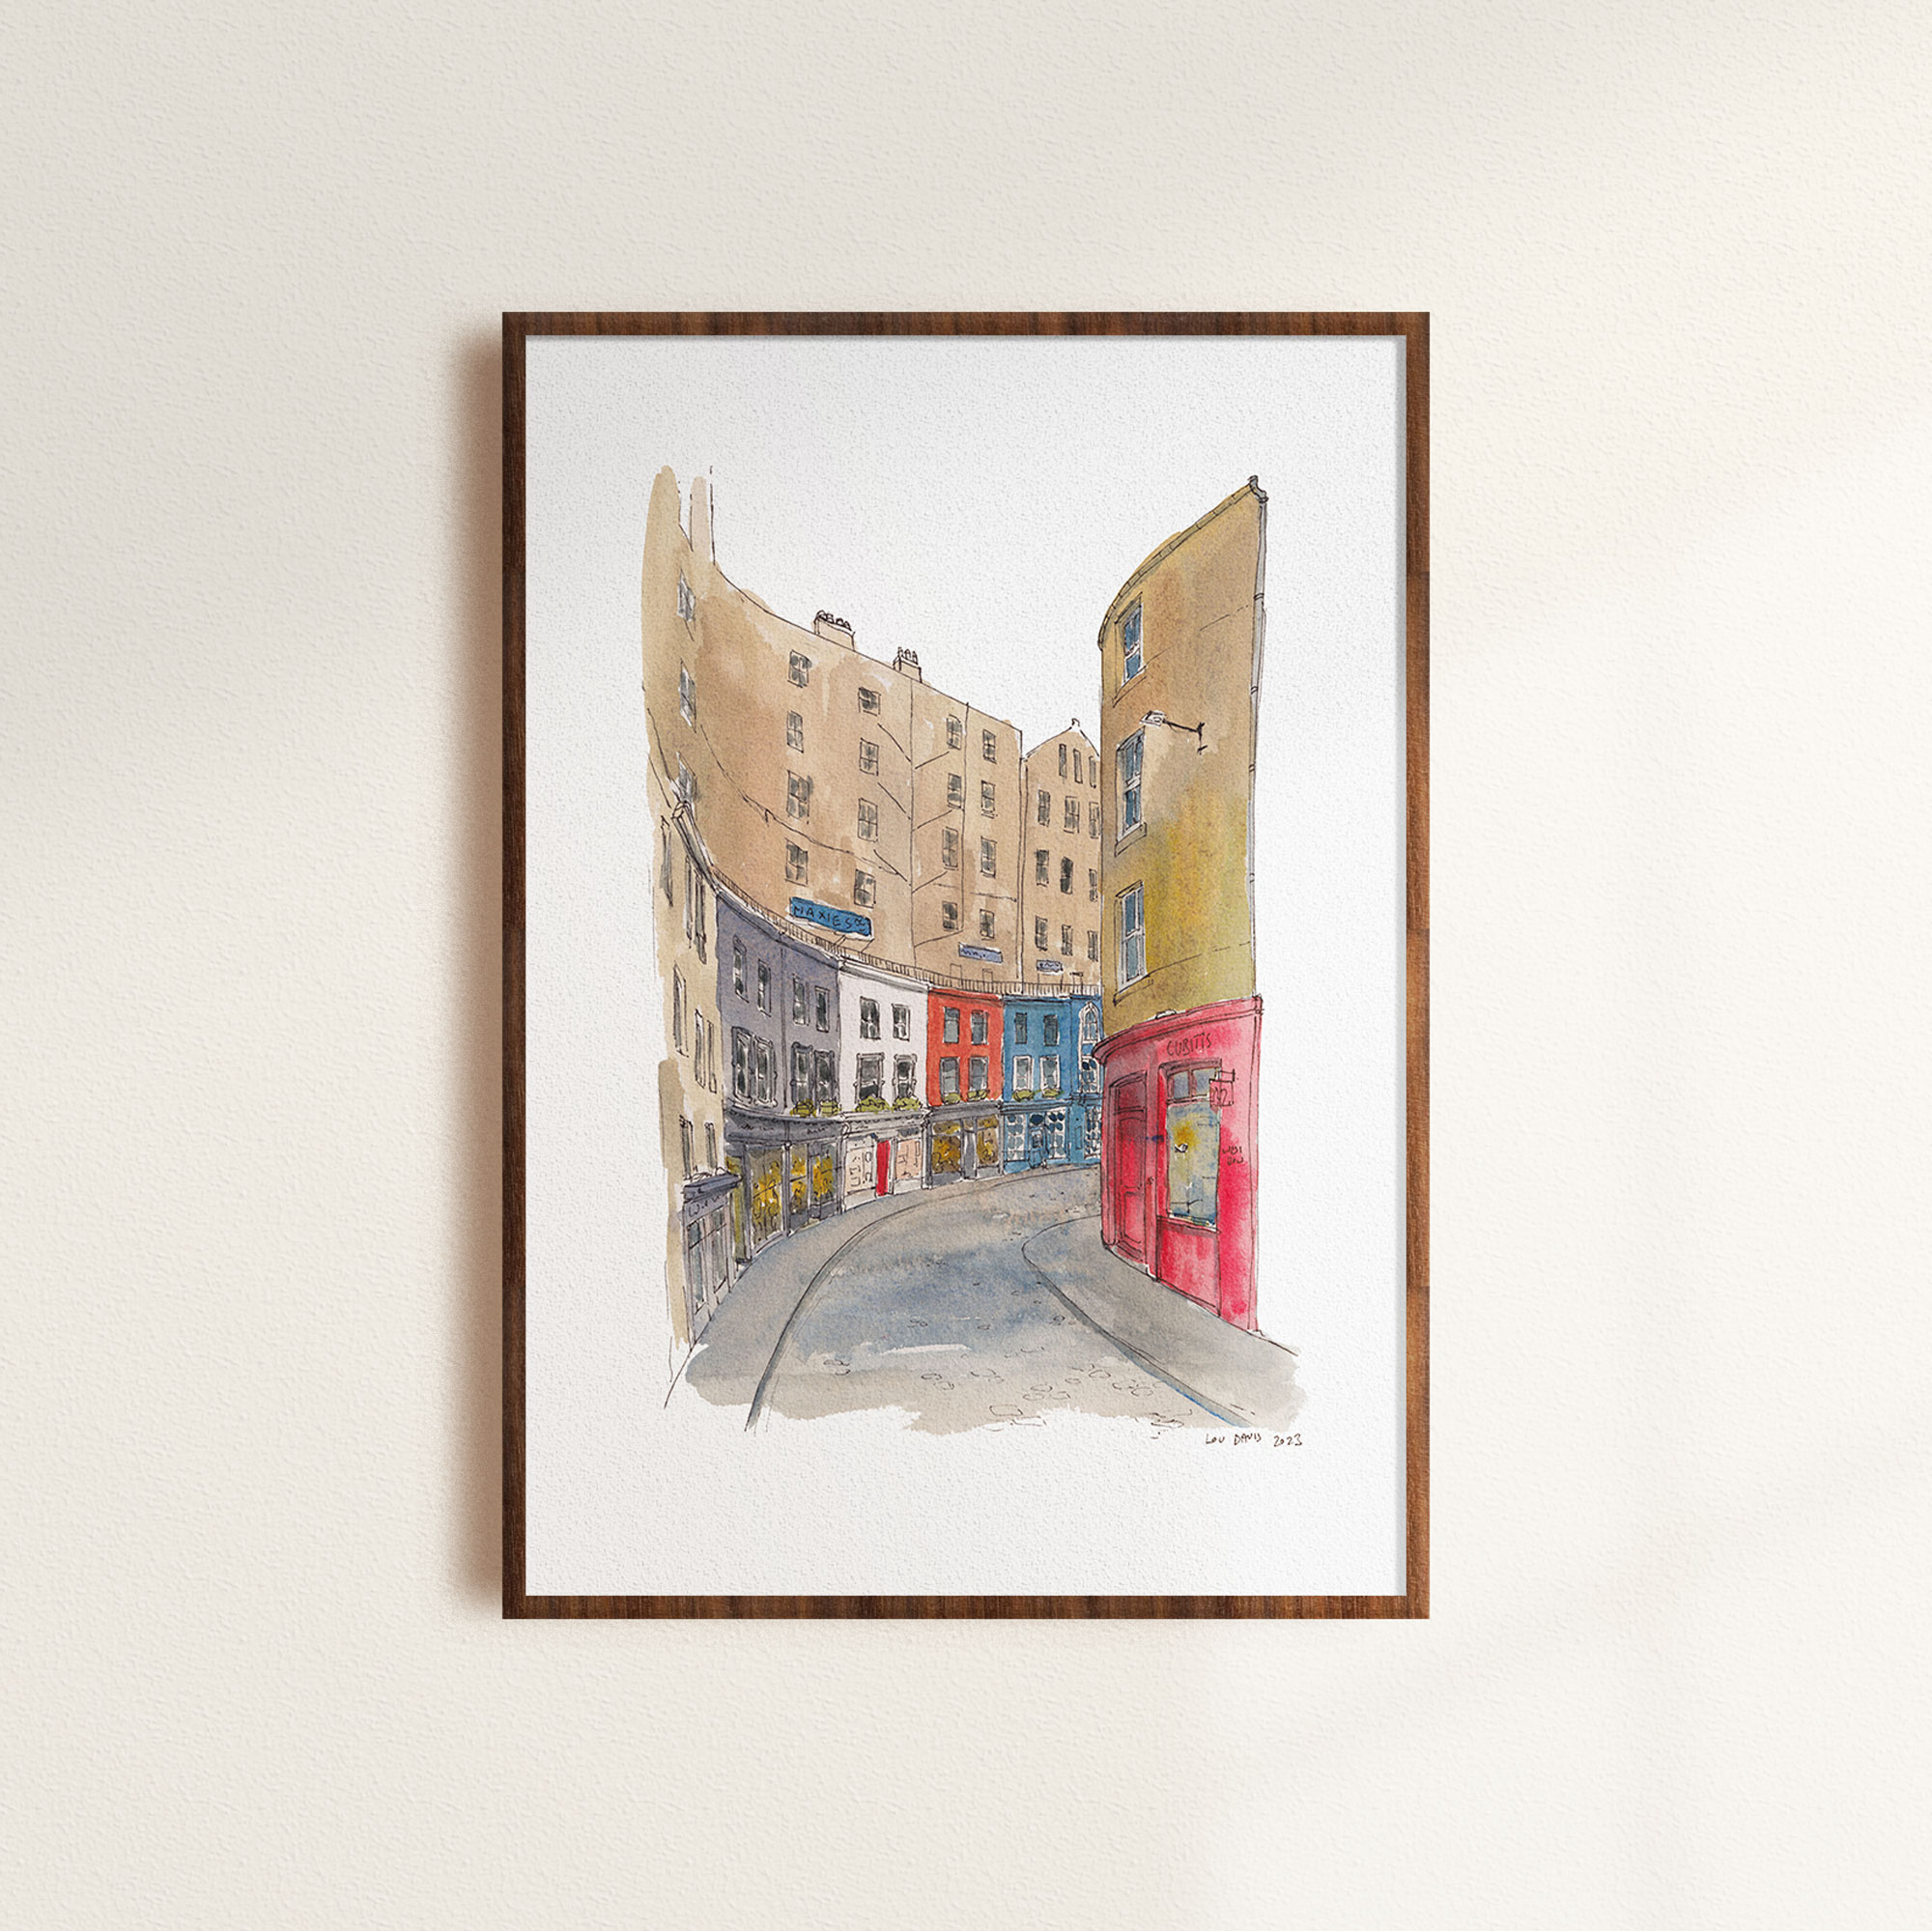 A line and wash painting of Victoria Street in a mockup frame